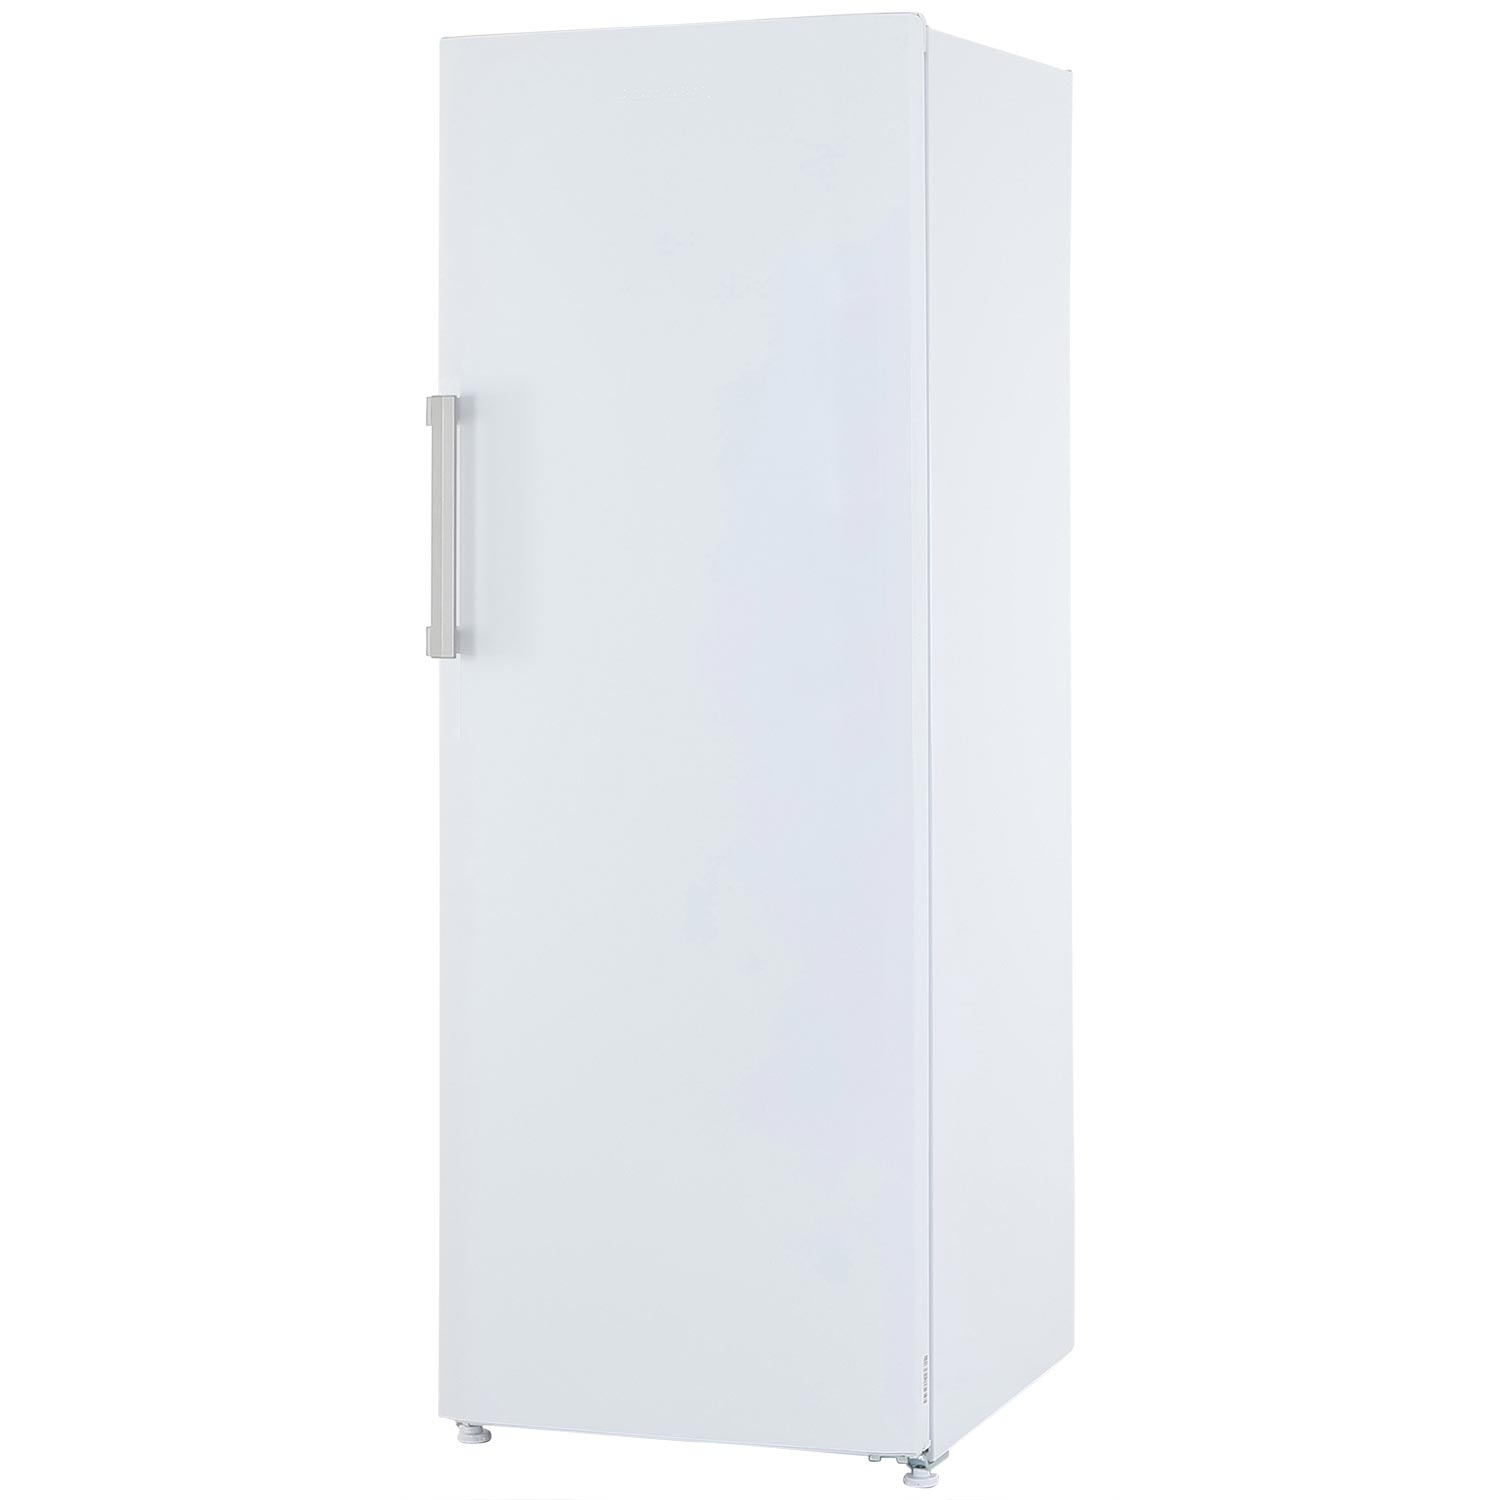 Blomberg Larder - White - A+ Energy Rated - 3